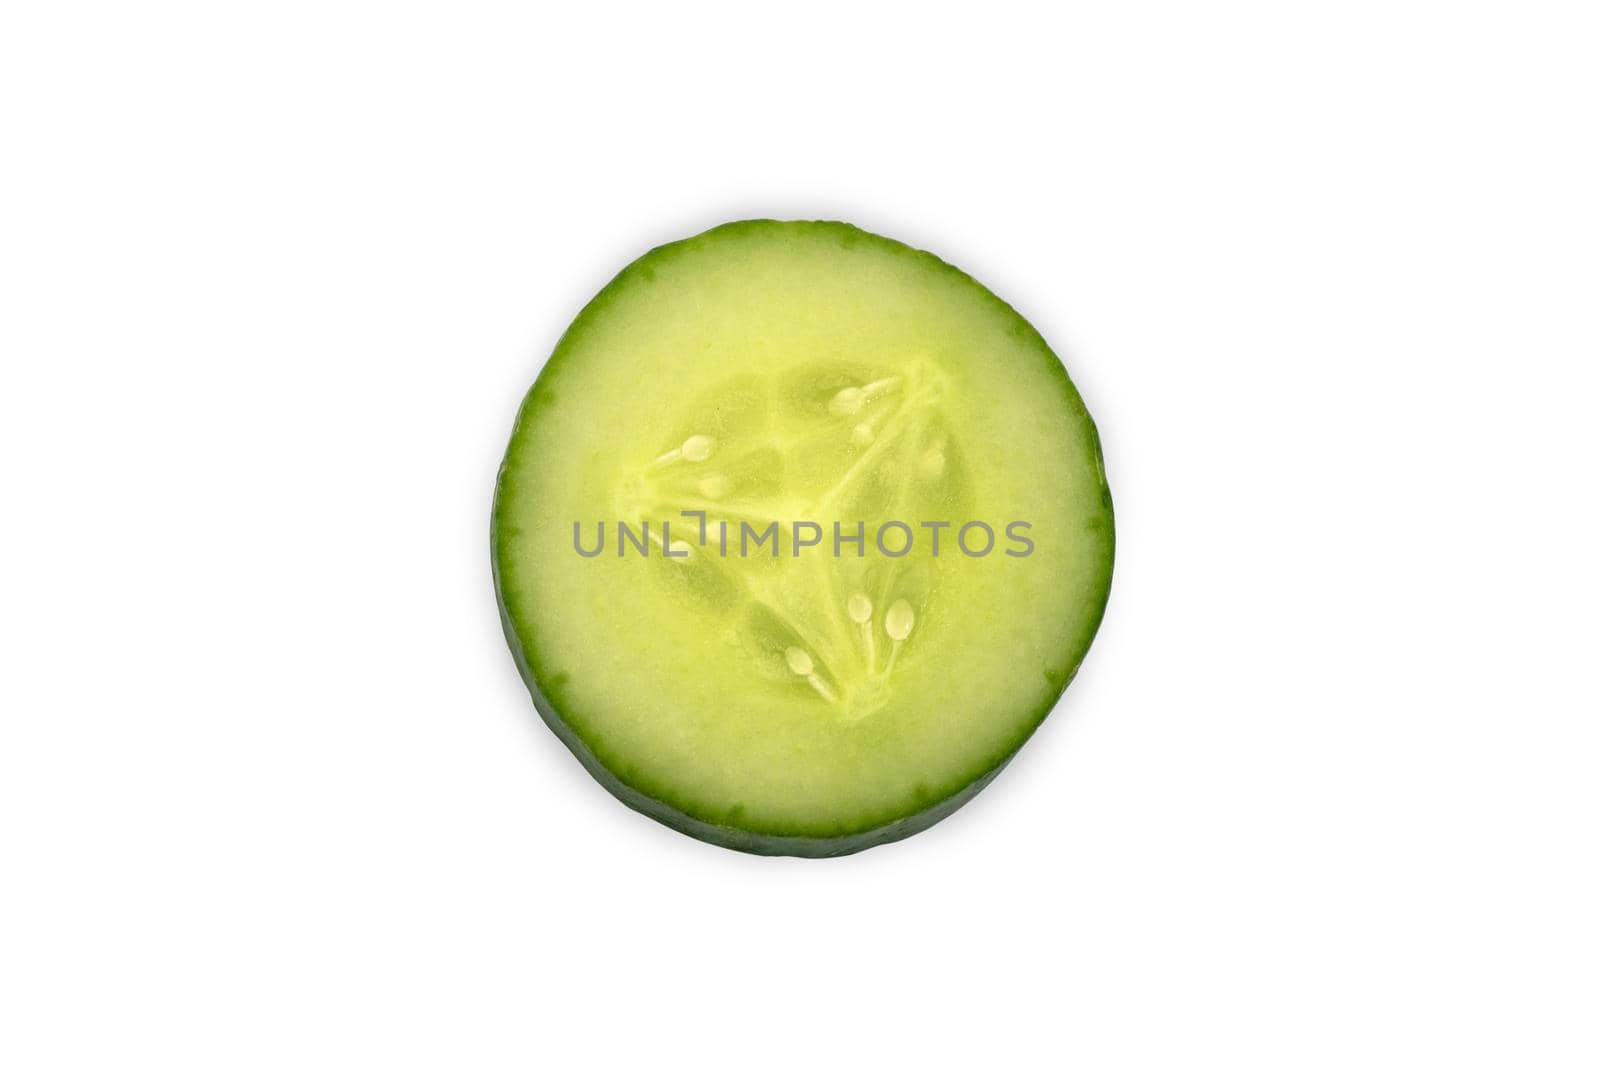 Freshly sliced cucumber close-up on a white background by shaadjutt36